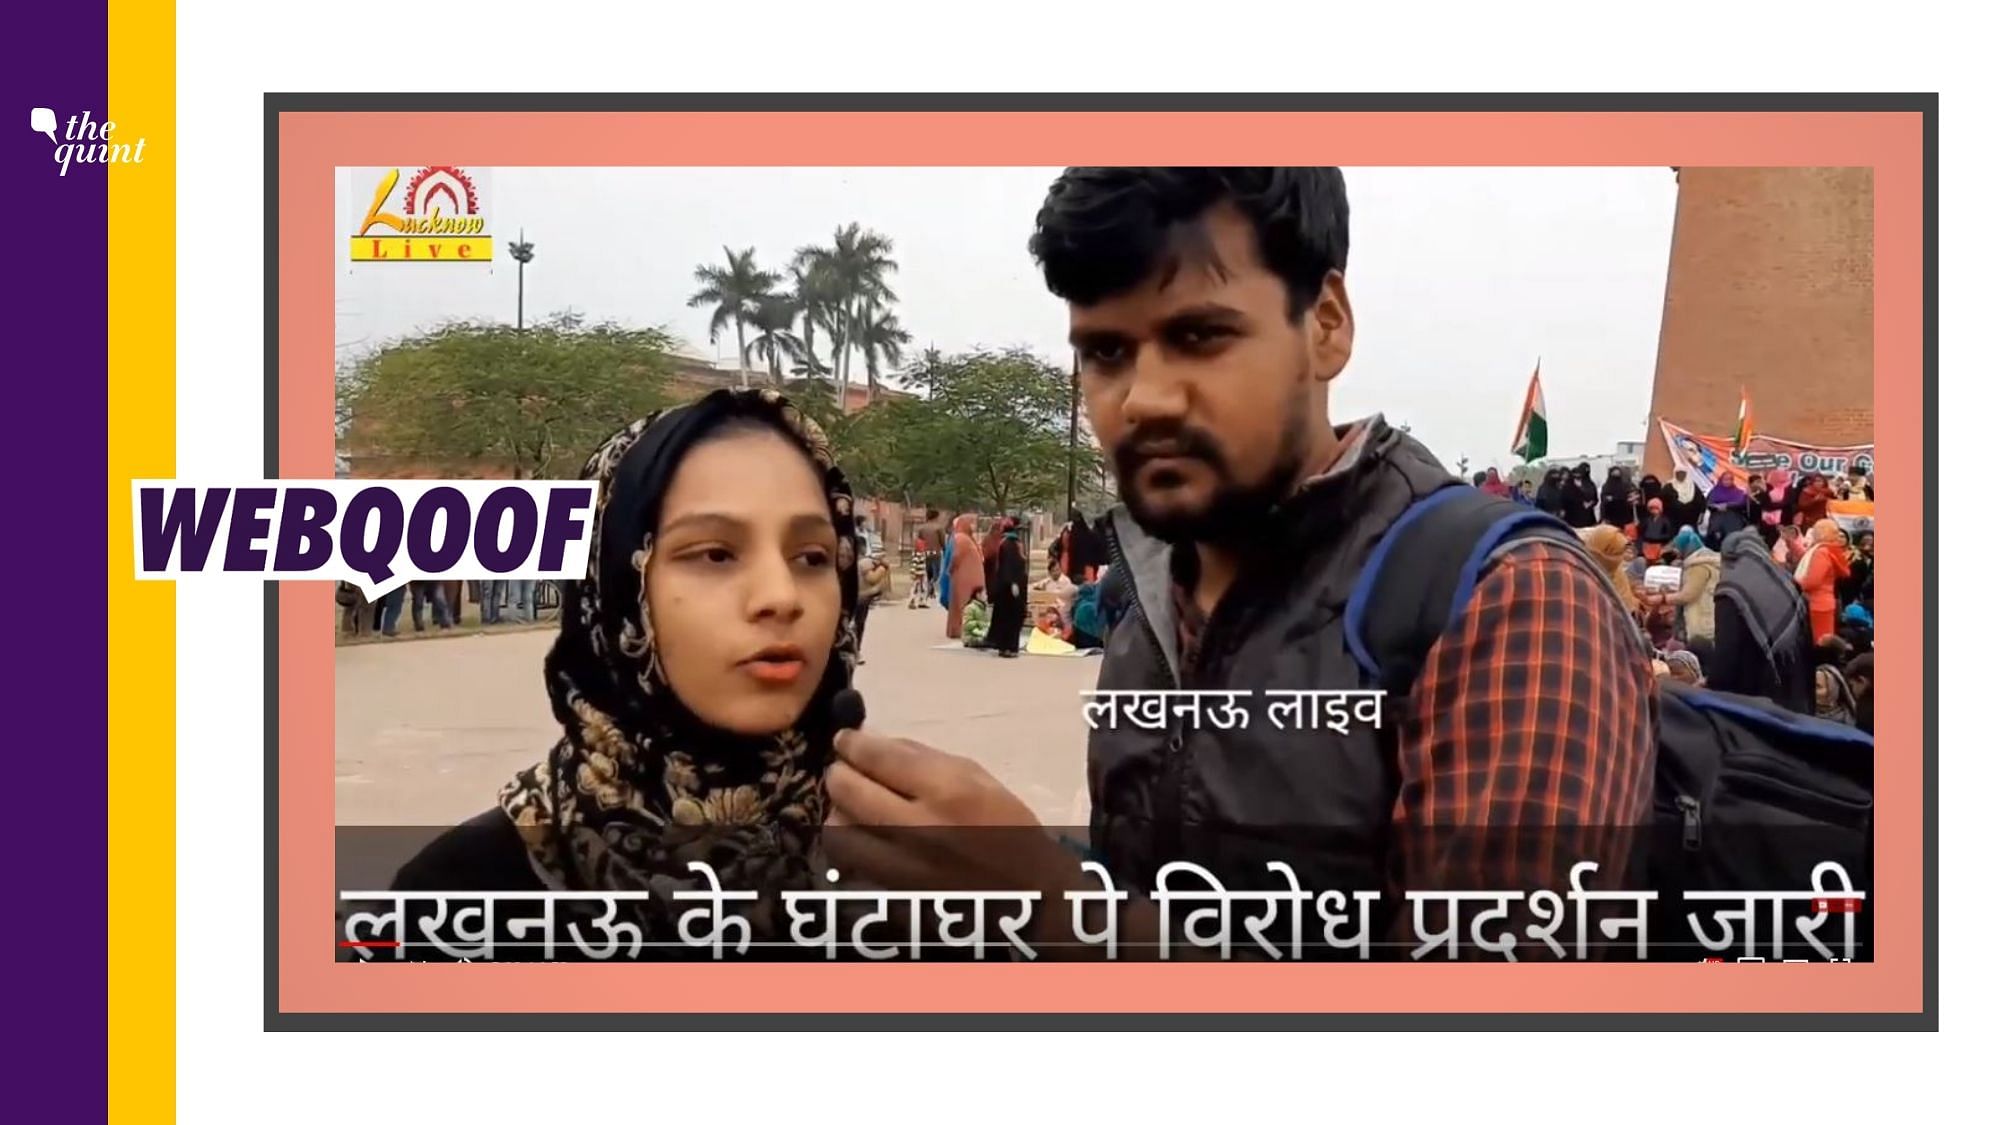 The video has been trimmed in a way that it appears that the protester in Lucknow is accepting that women protesters are paid Rs 500 to raise their voice against the newly amended Citizenship law.